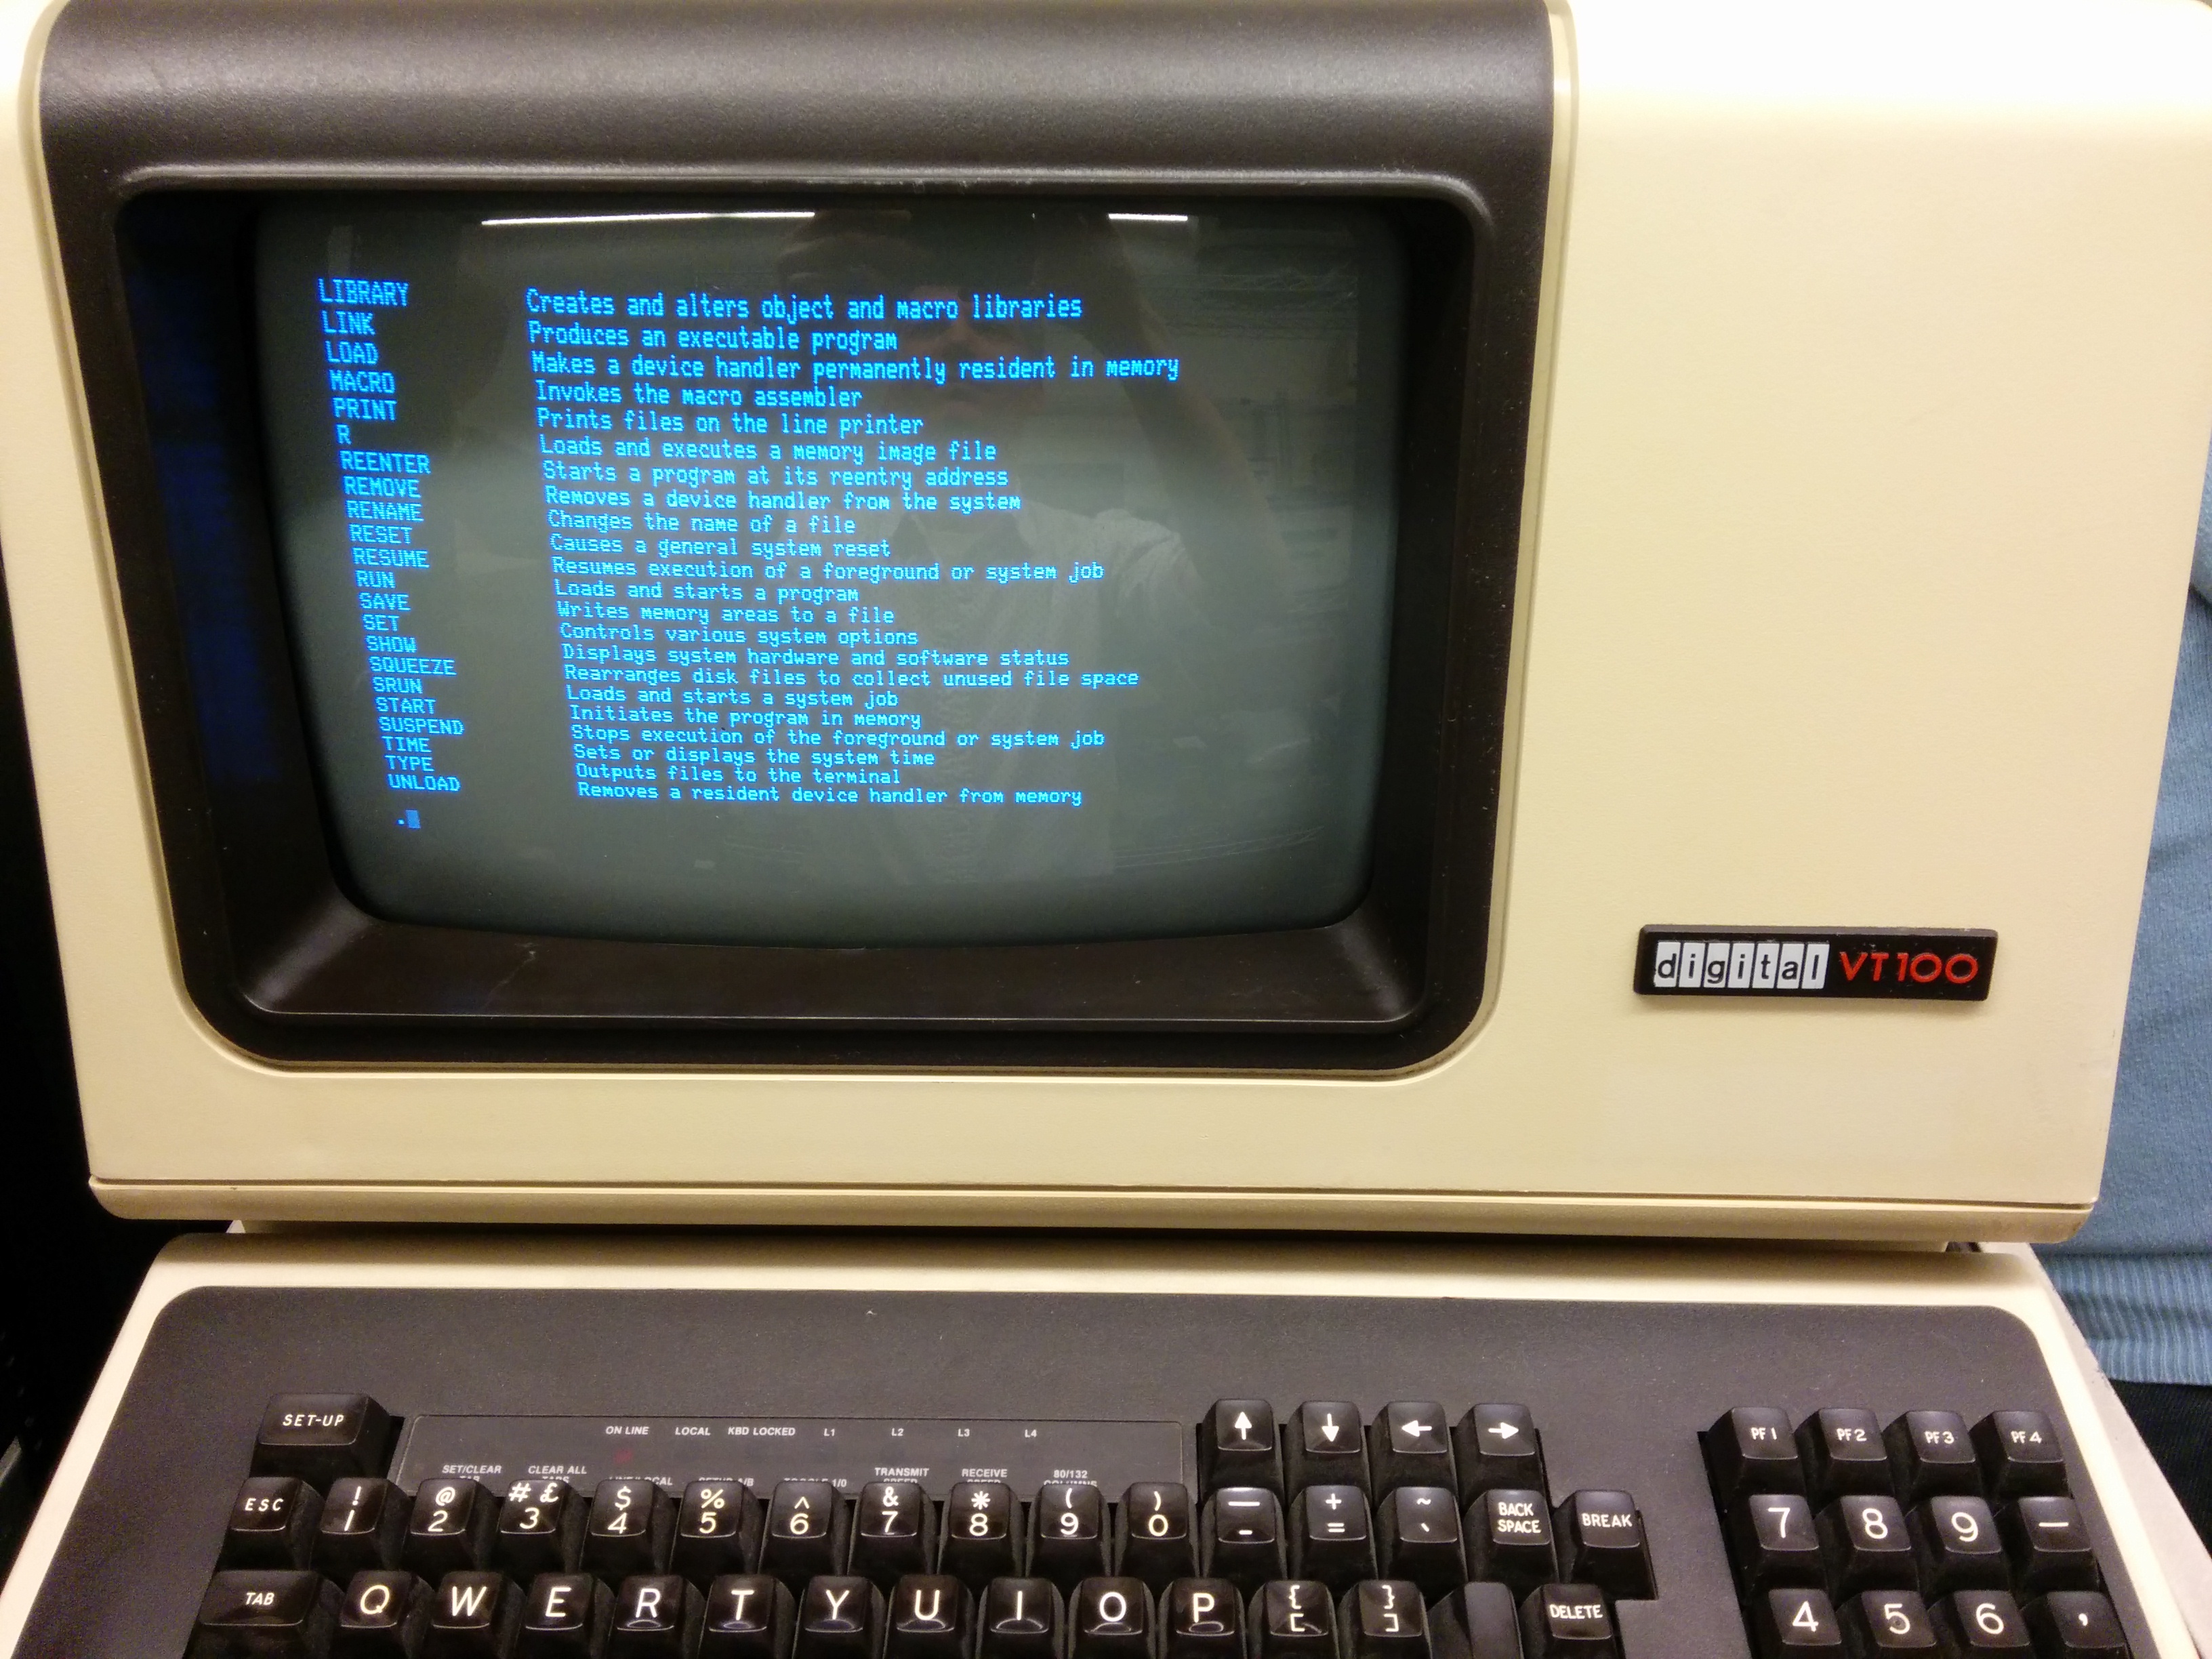 HELP command output from RT-11SJ running on a PDP-11/34 displayed on a VT100 VDU. [3]